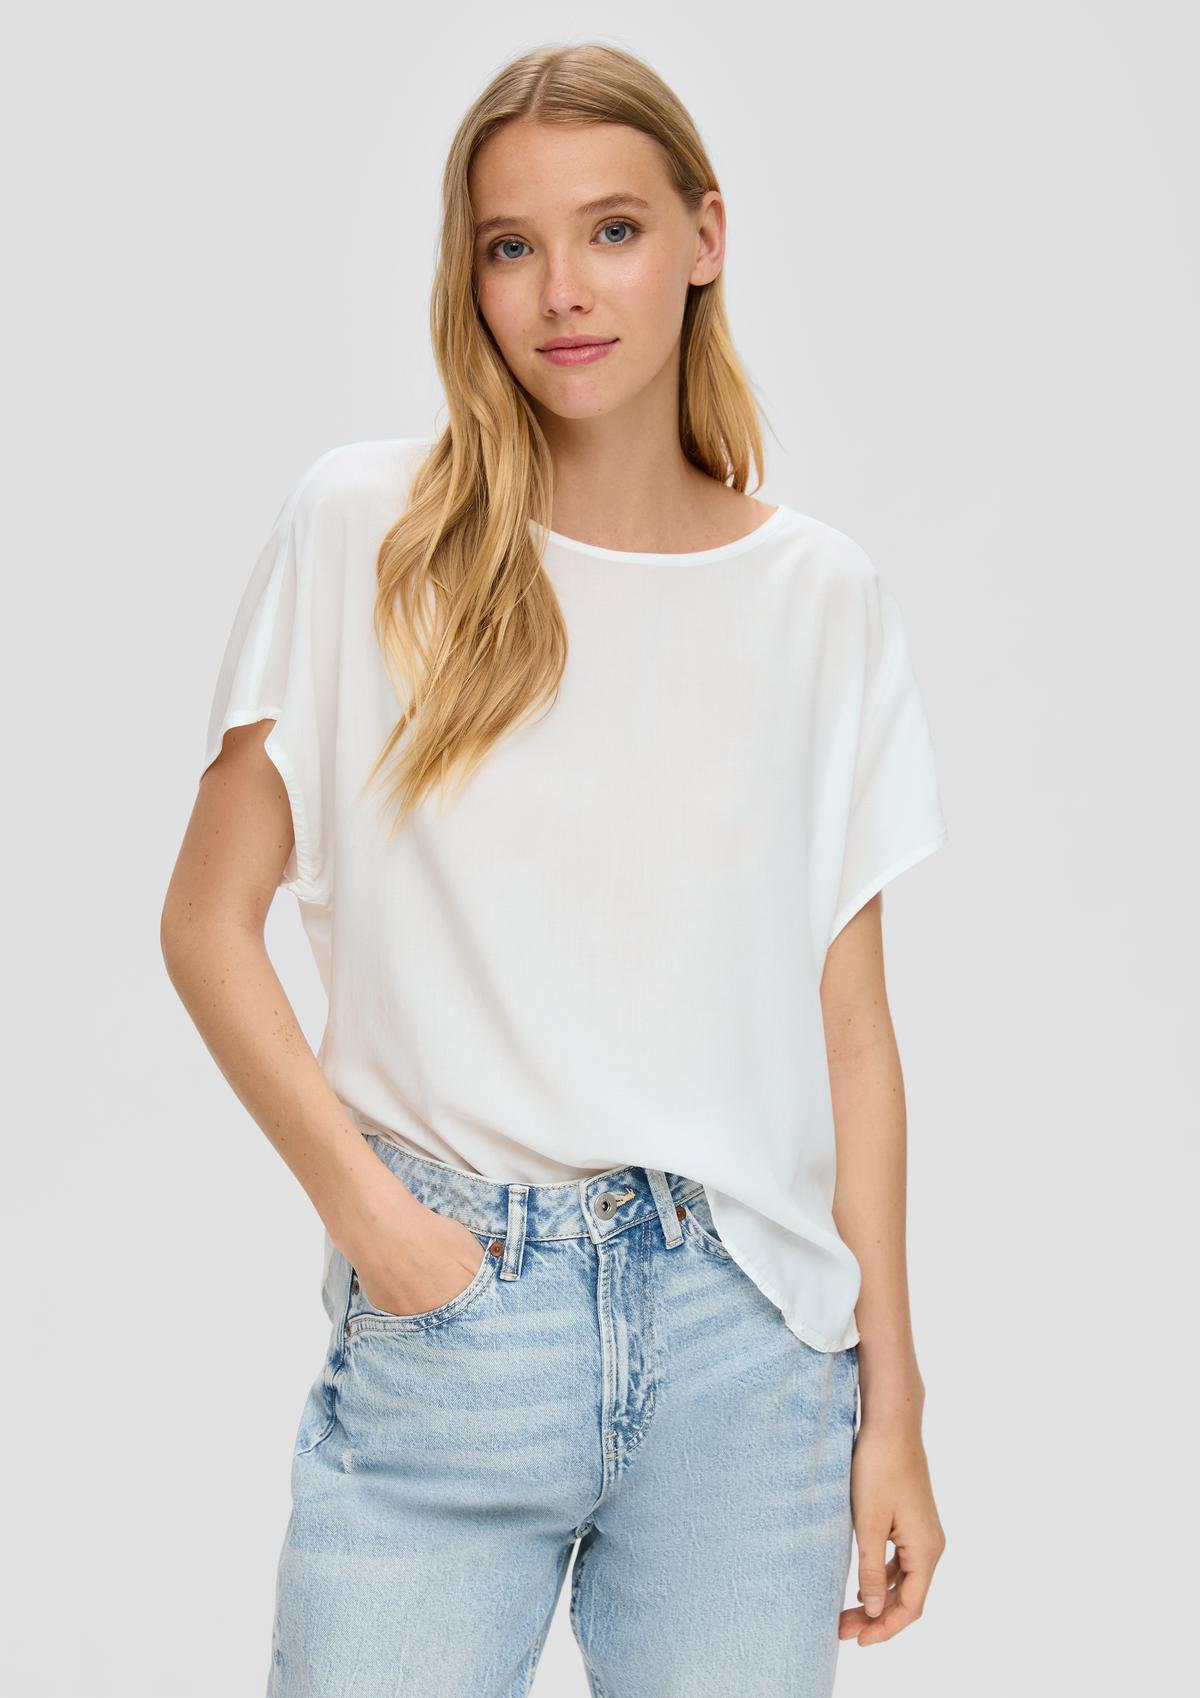 Oversized top with an elongated back